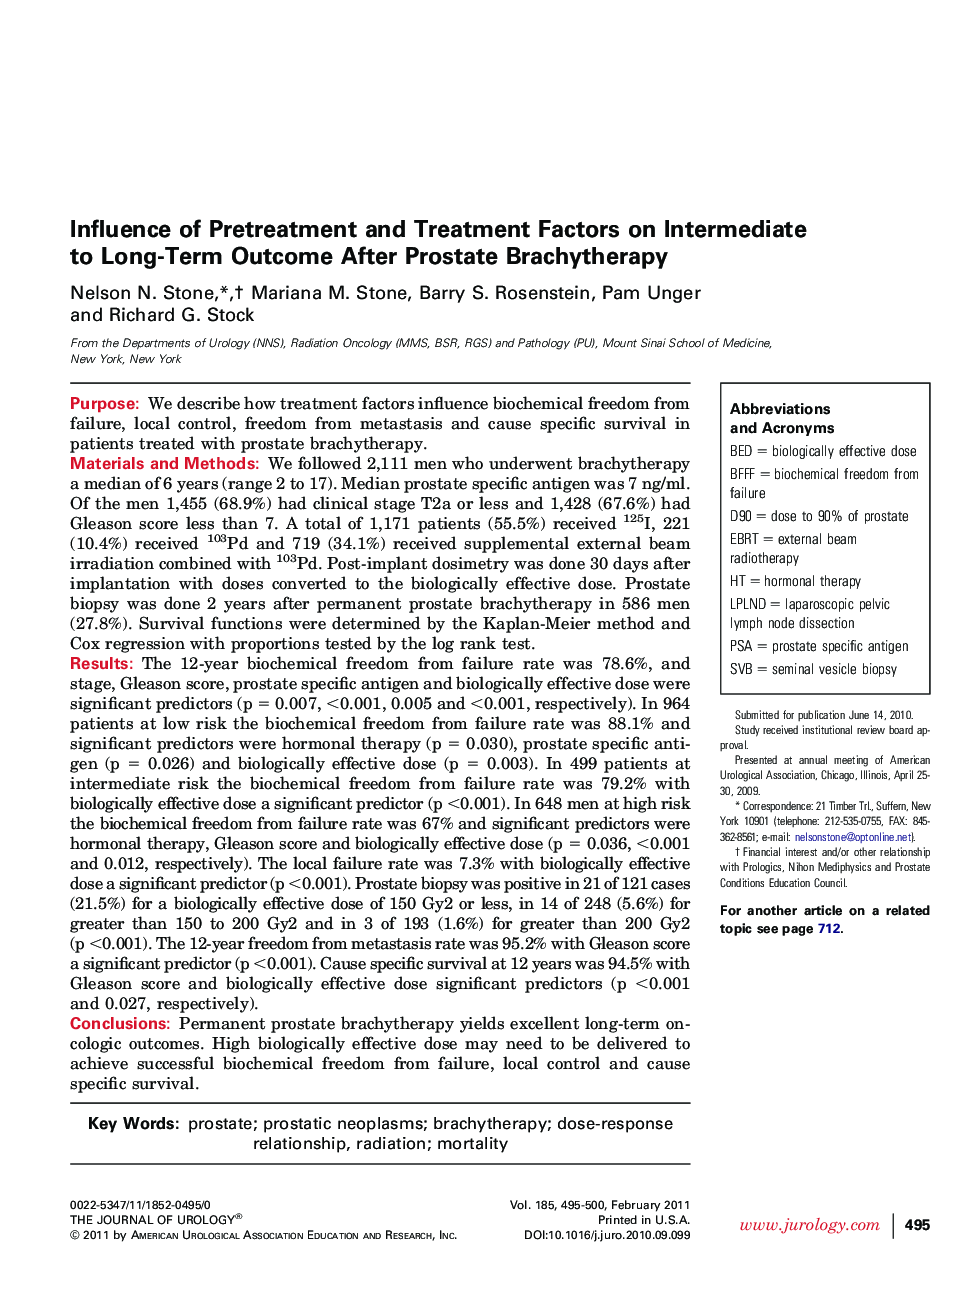 Influence of Pretreatment and Treatment Factors on Intermediate to Long-Term Outcome After Prostate Brachytherapy